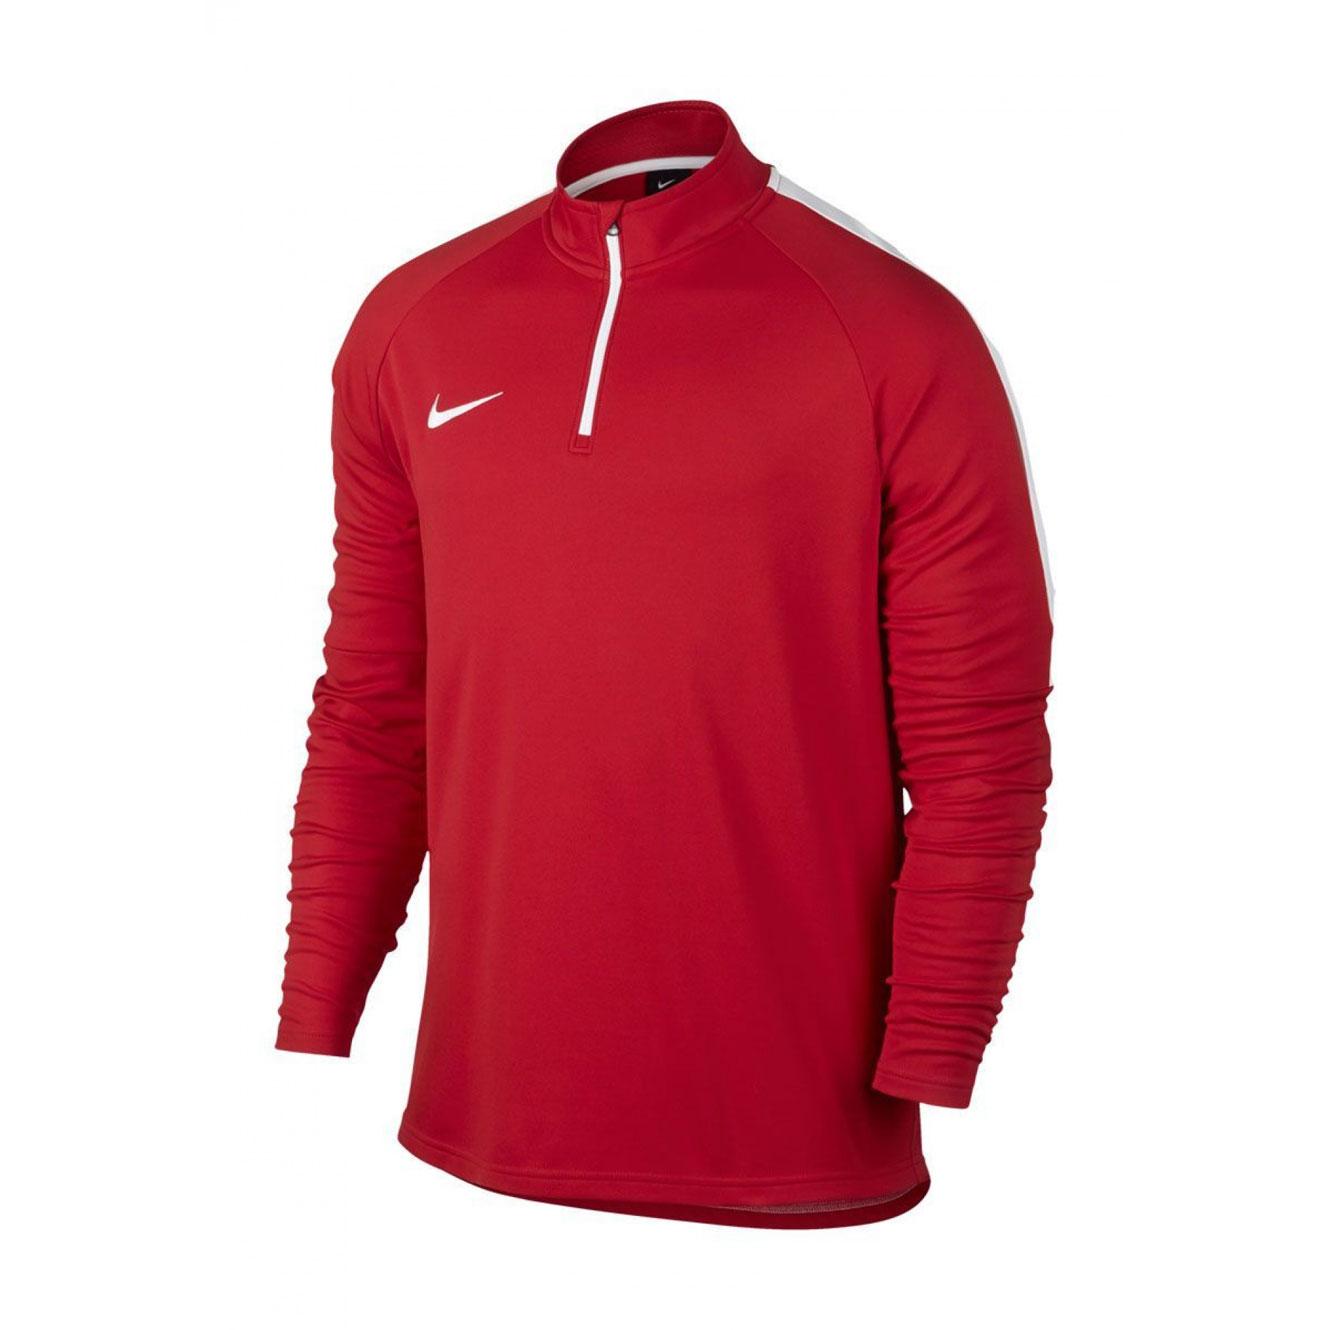 cabin family Sincerity Nike Drill Top Academy 839344-657